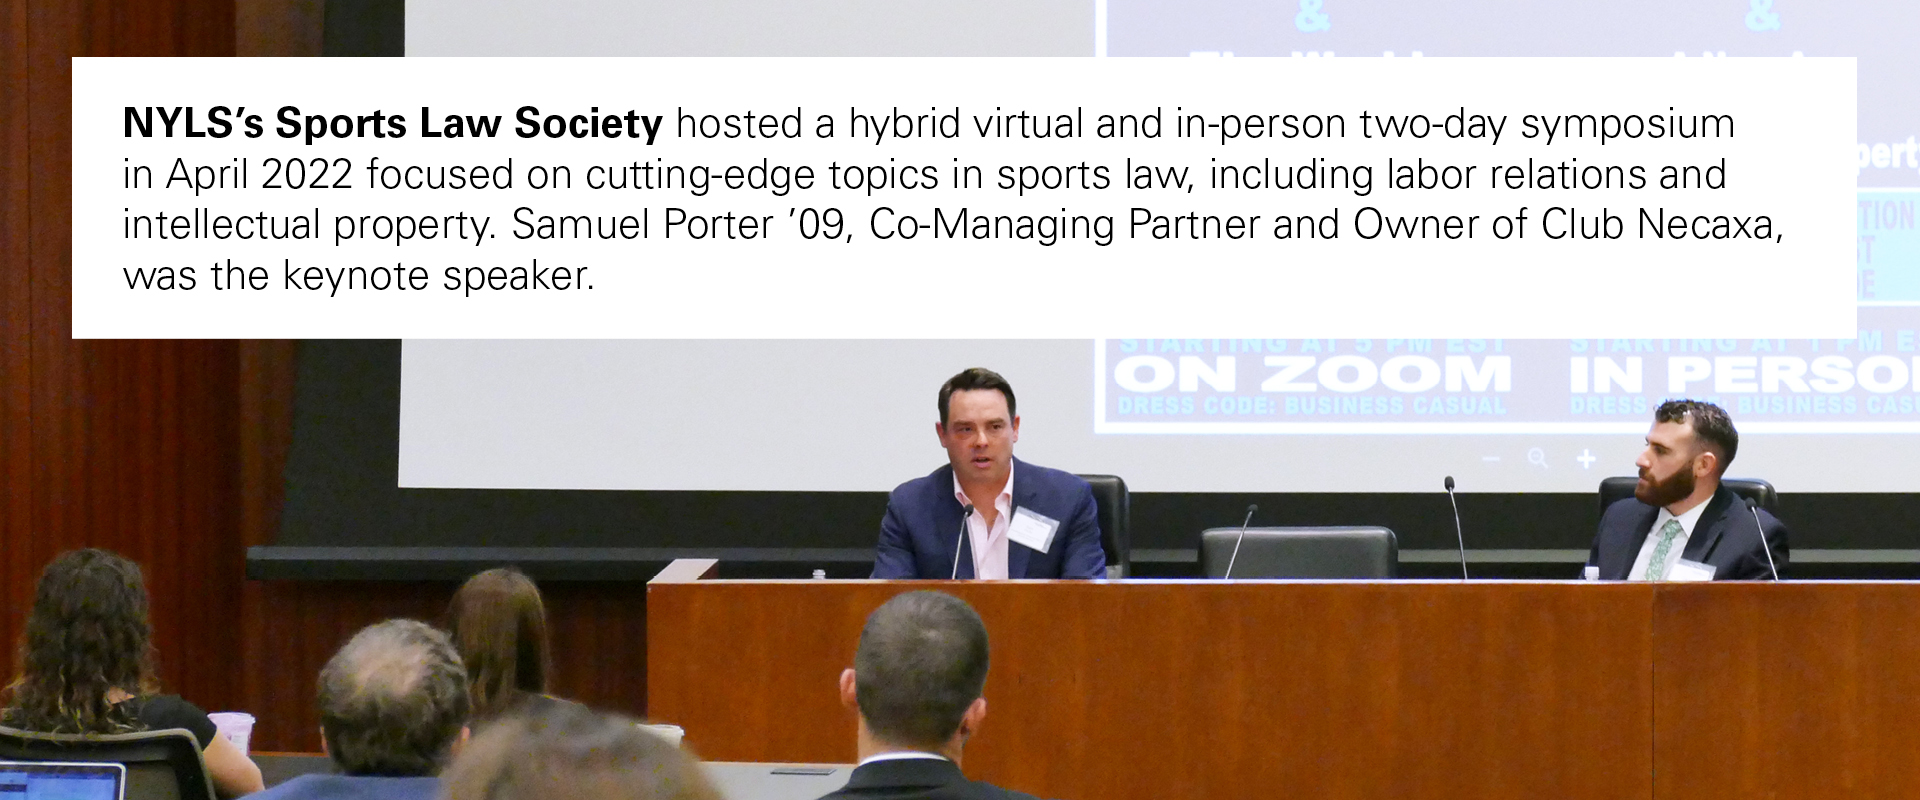 NYLS’s Sports Law Society hosted a hybrid virtual and in-person two-day symposium in April 2022 focused on cutting-edge topics in sports law, including labor relations and intellectual property. Samuel Porter ’09, Co-Managing Partner and Owner of Club Necaxa, was the keynote speaker.